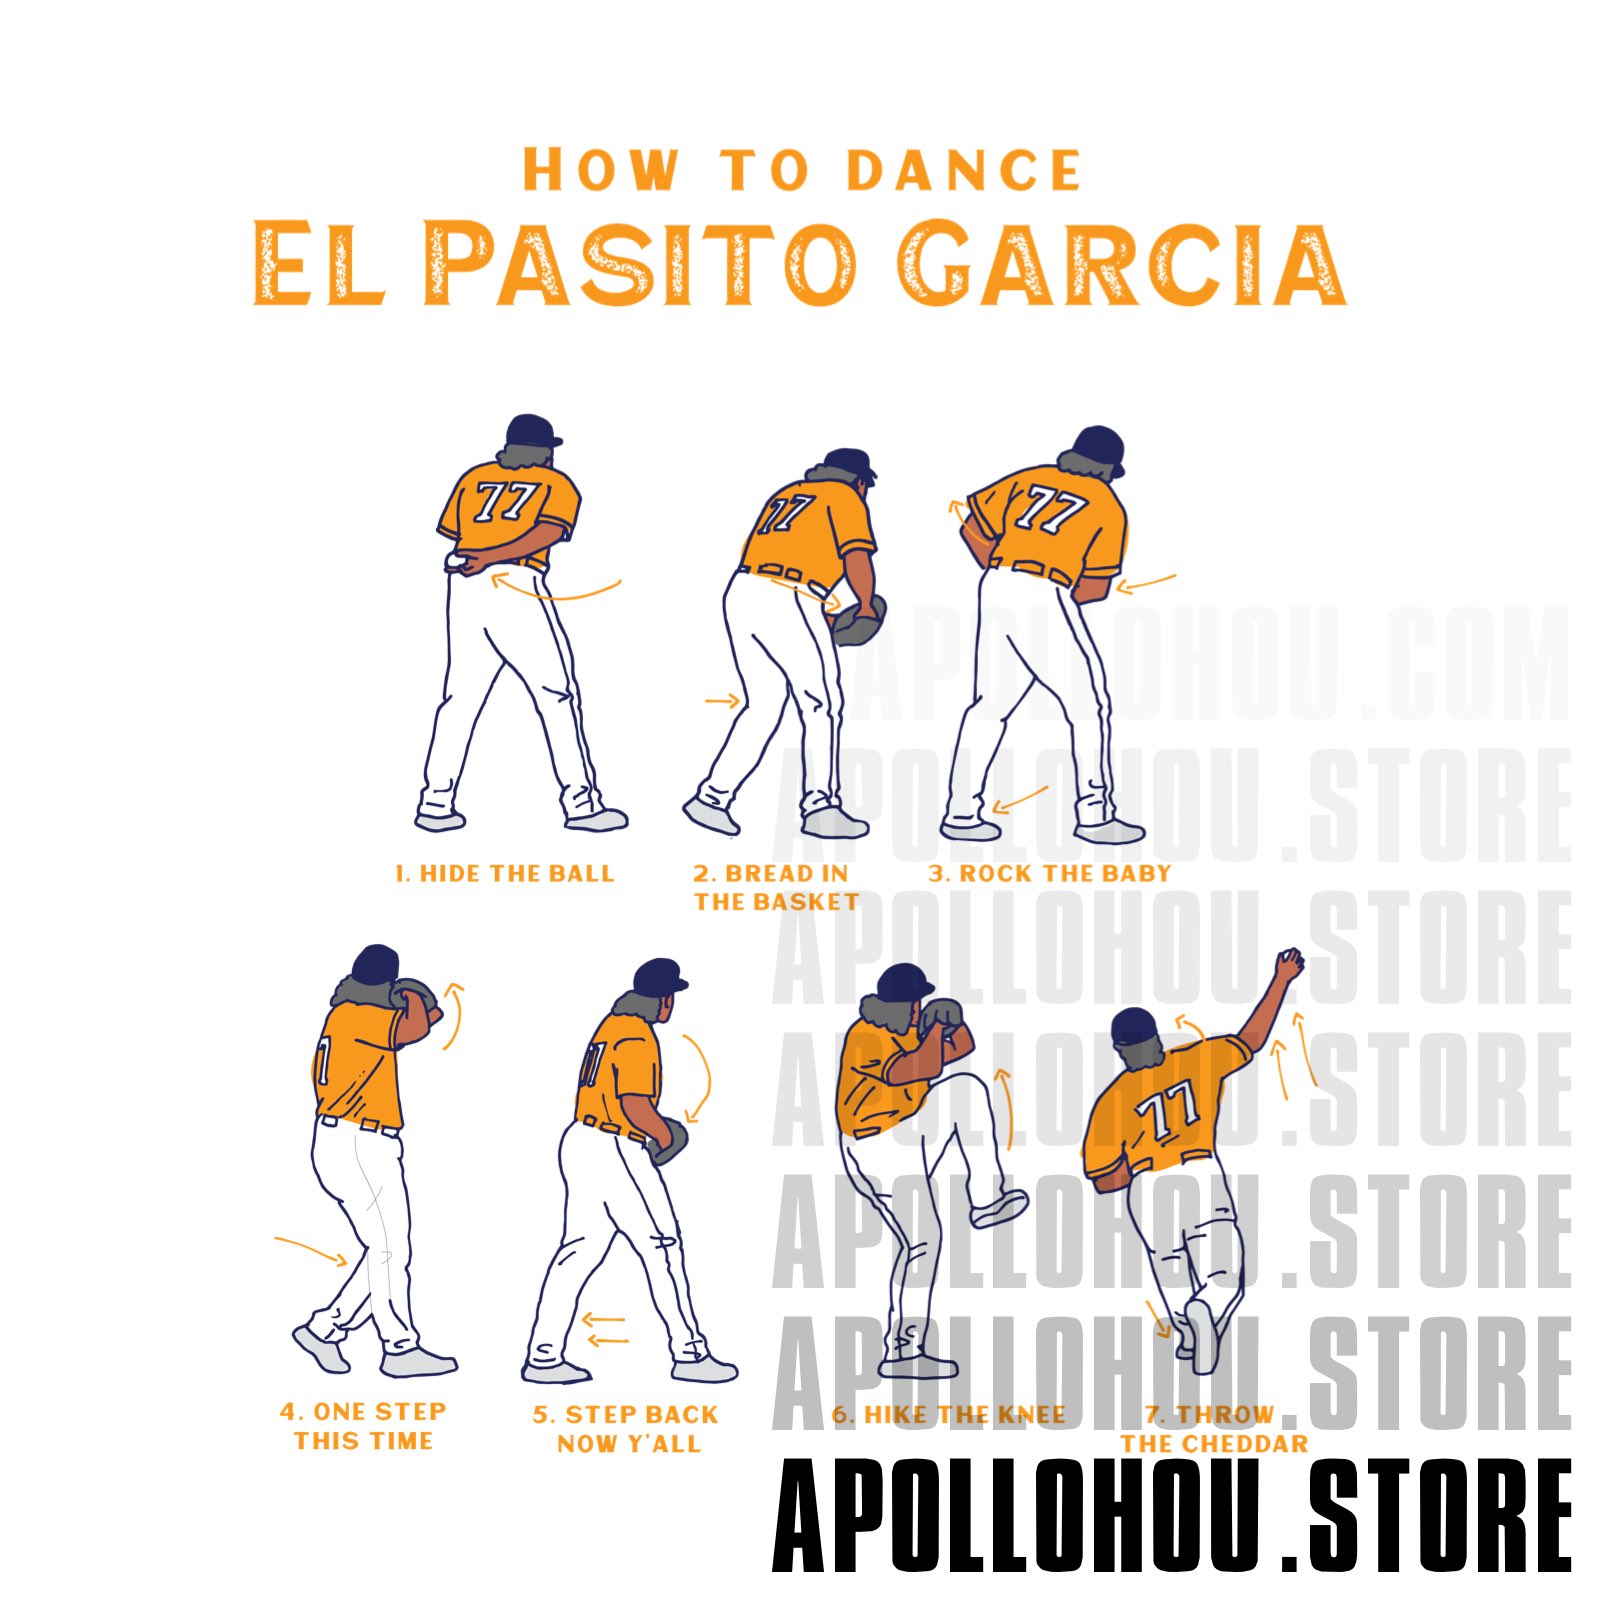 APOLLO MEDIA on X: It's Garcia day!! 🚨 Which means it's time to drop our  first Luis Garcia shirt! “El Pasito Garcia” Here's our shirt with the  step-by-step guide on how to